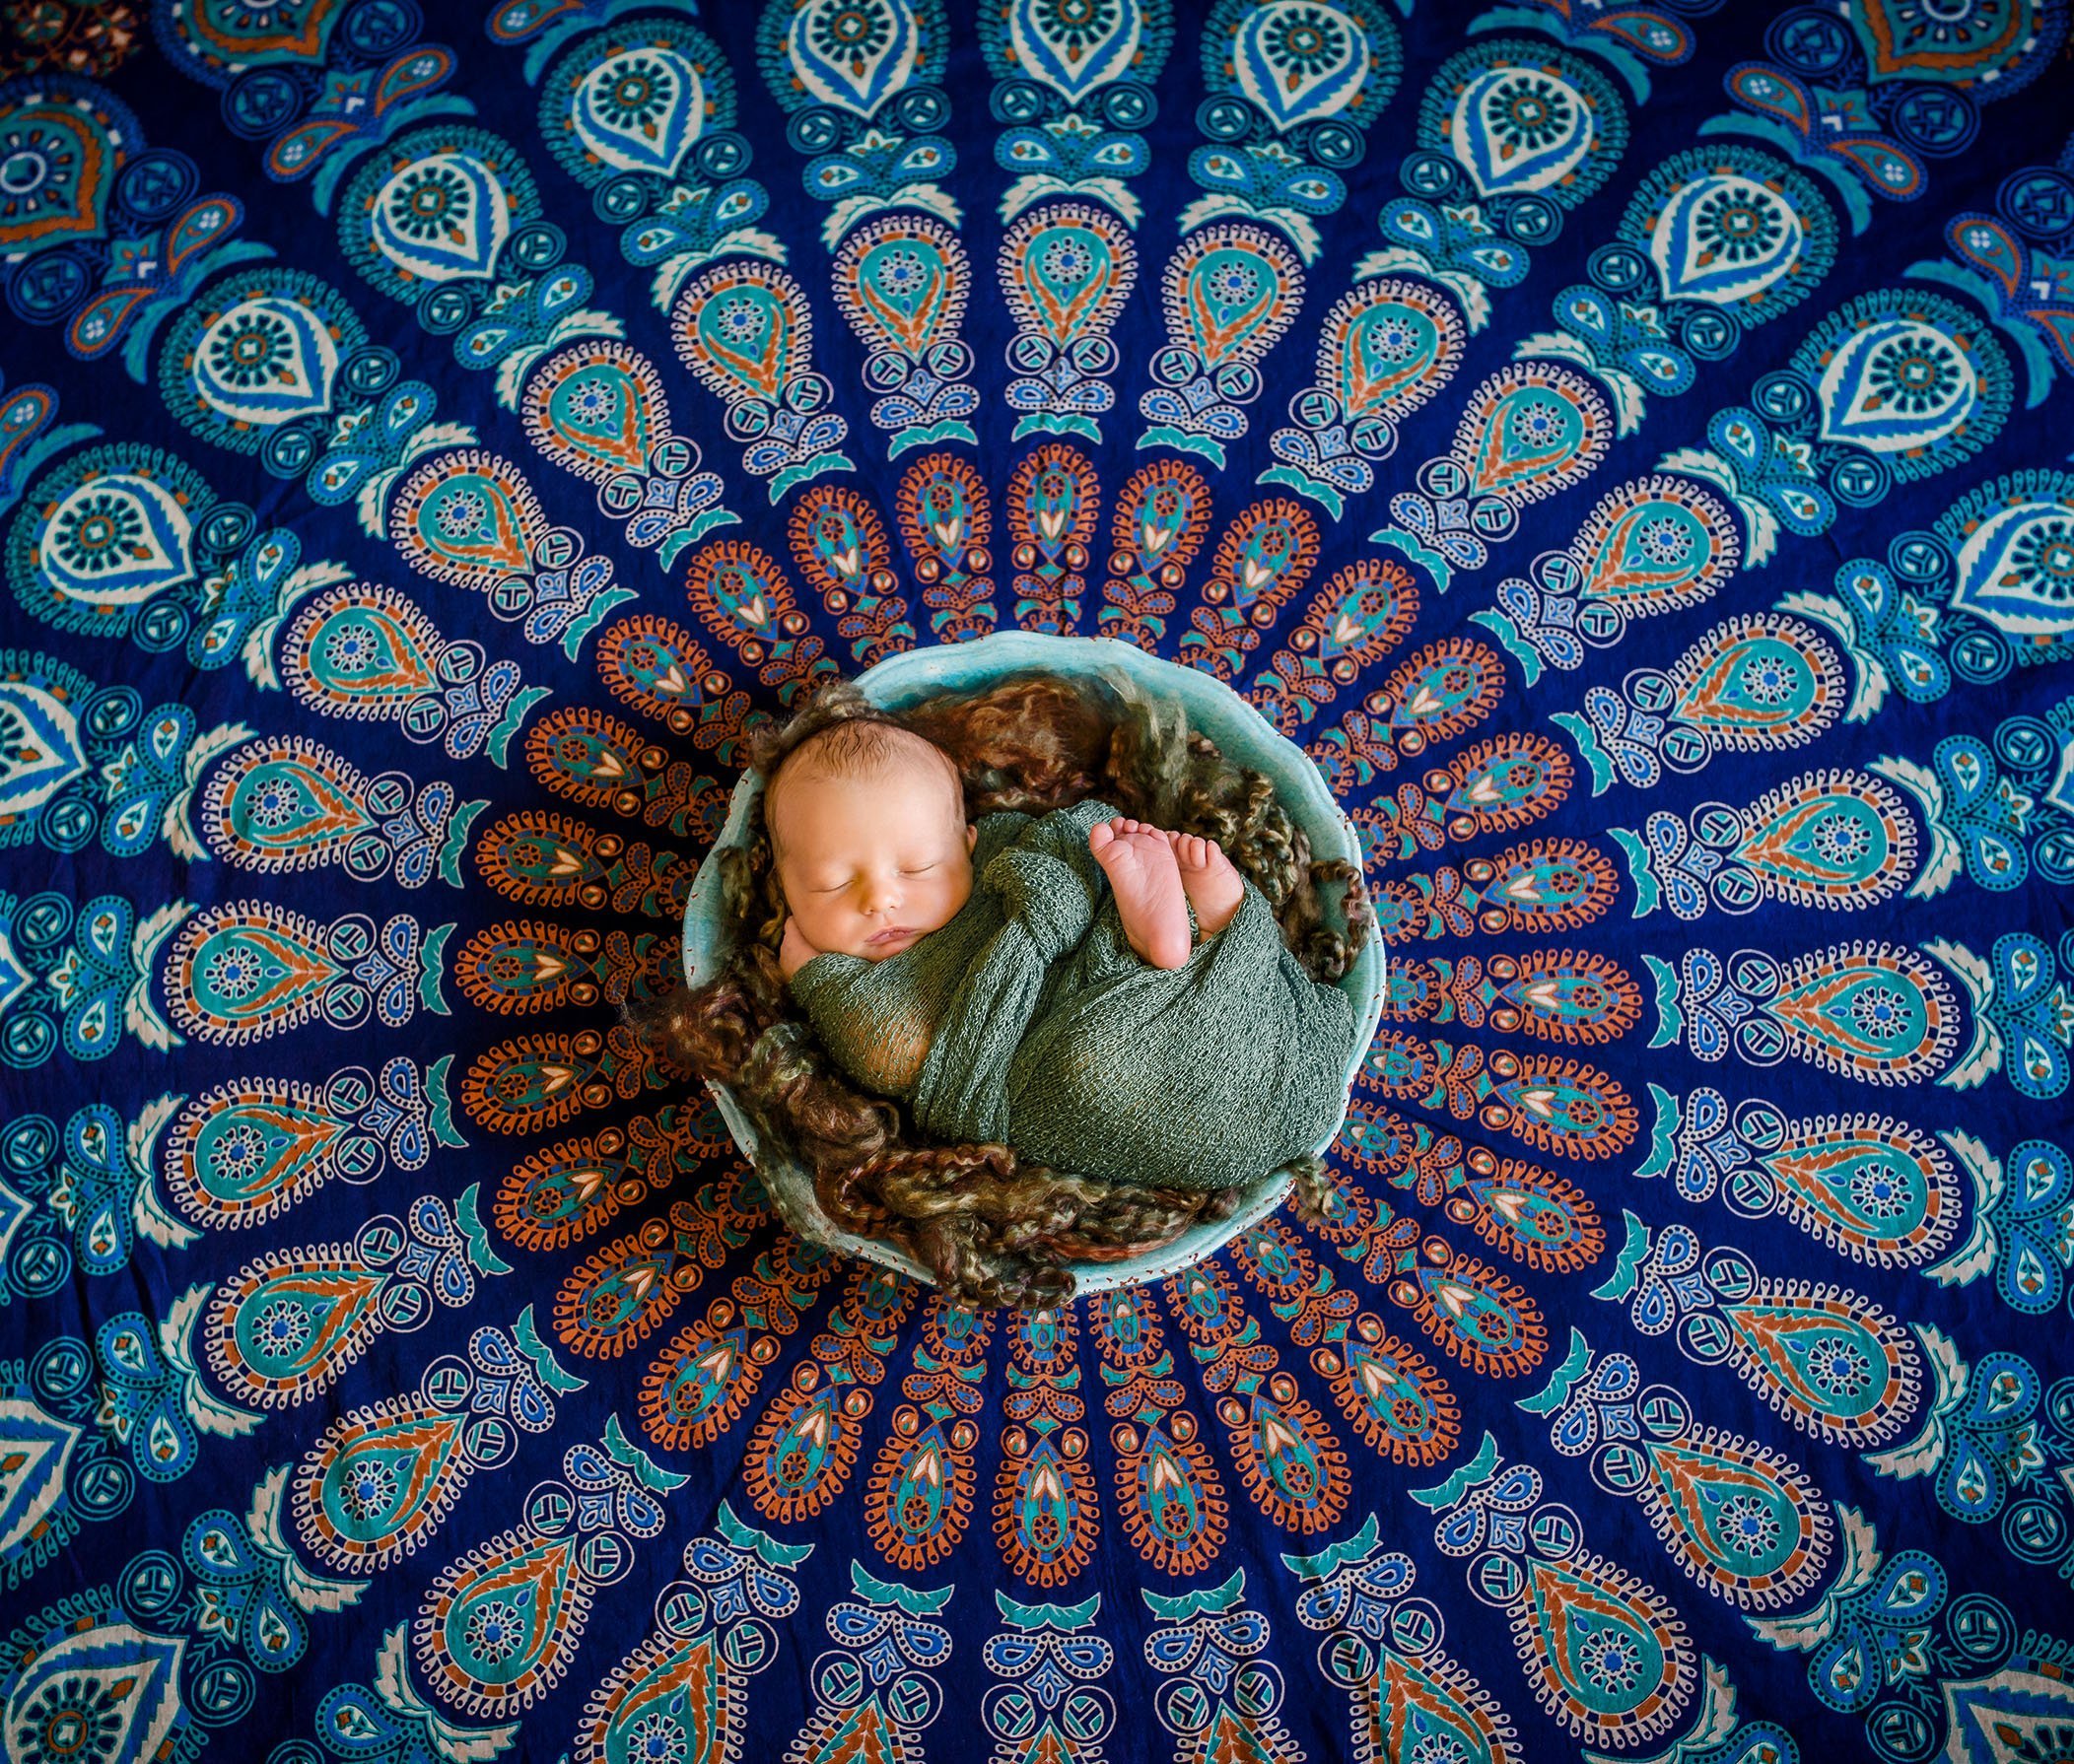 newborn baby curled up in a bowl in the middle of an Indian spiral tapestry